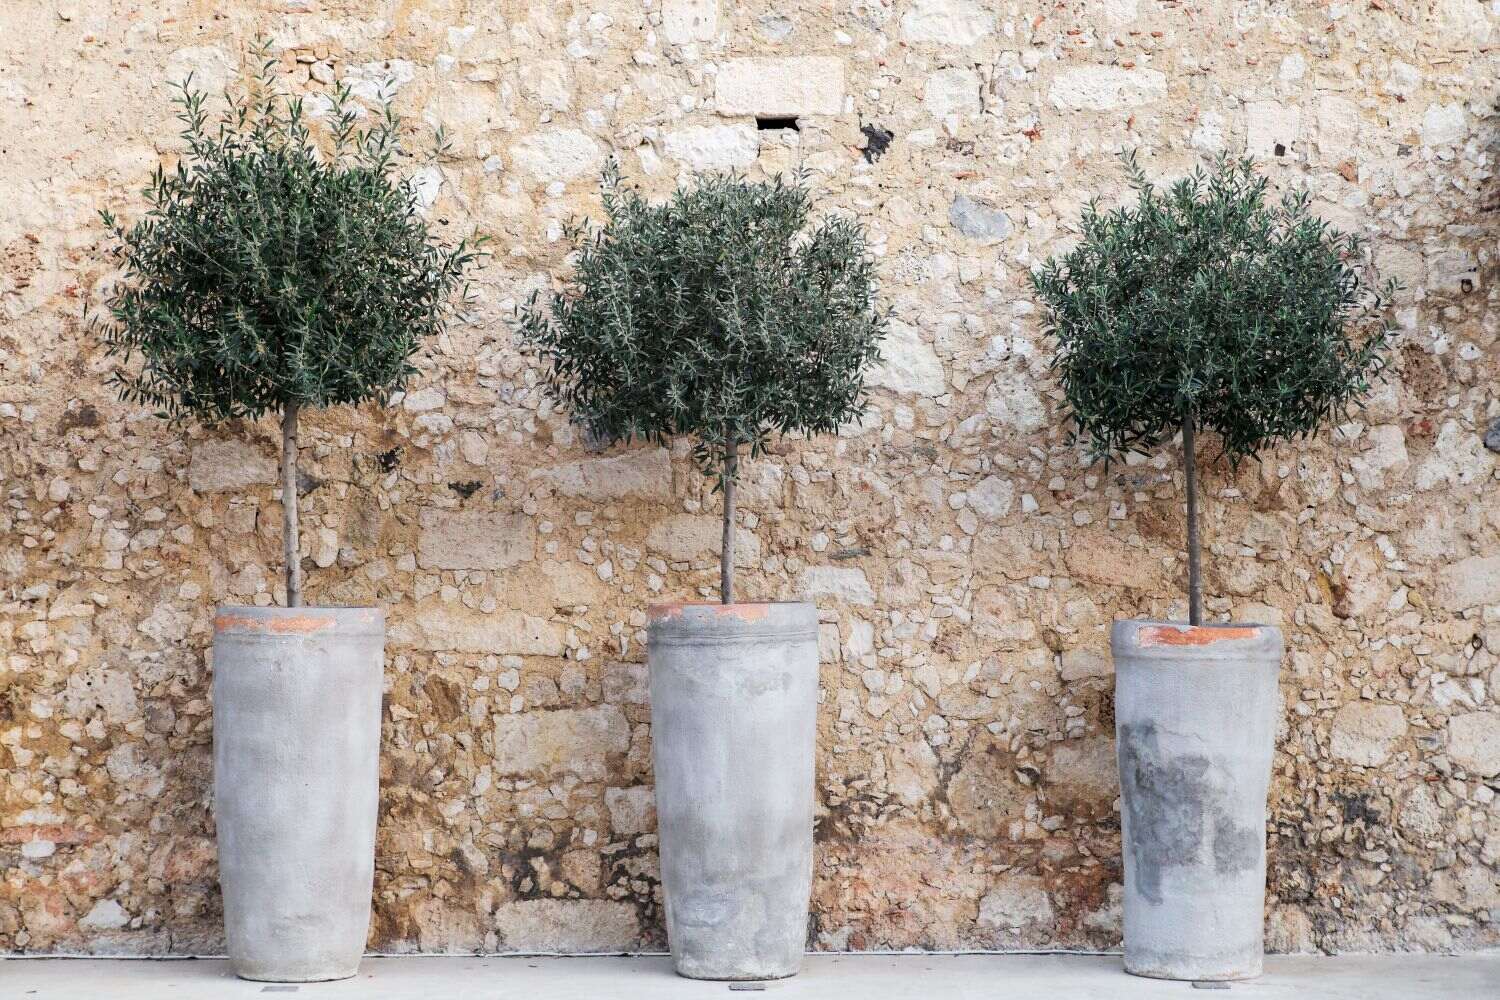 How Long Does It Take For An Olive Tree To Grow From Seed